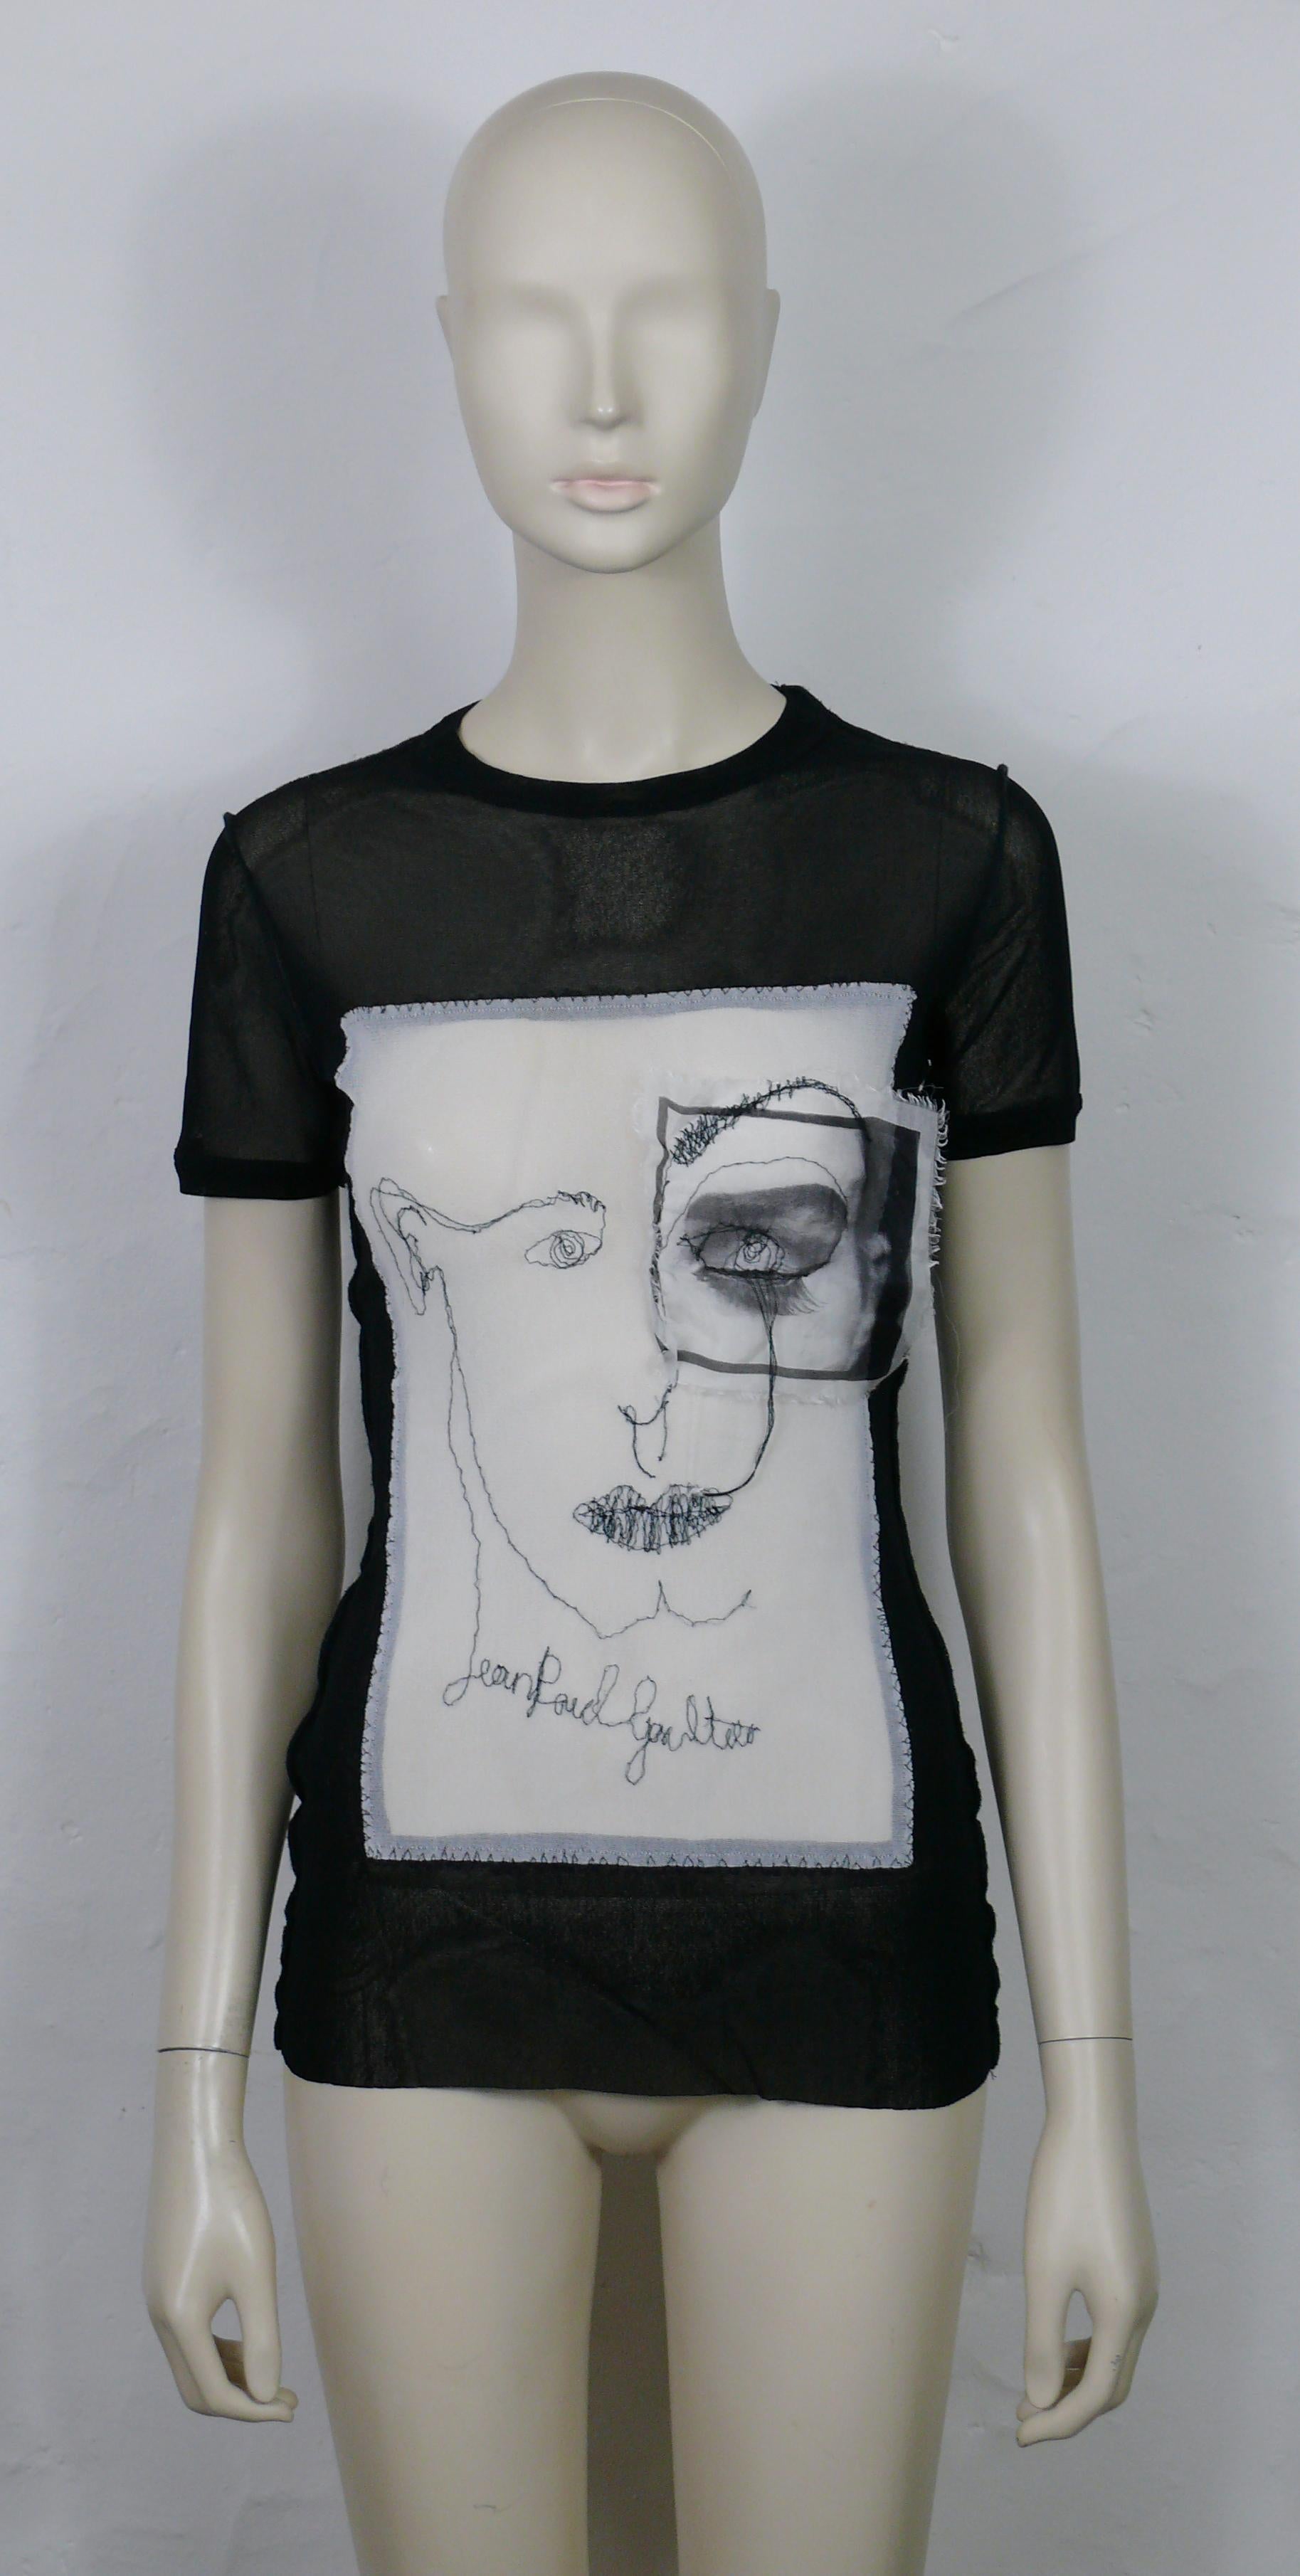 JEAN PAUL GAULTIER Vintage Portrait and Eye Applique Mesh Top Size L In Good Condition For Sale In Nice, FR